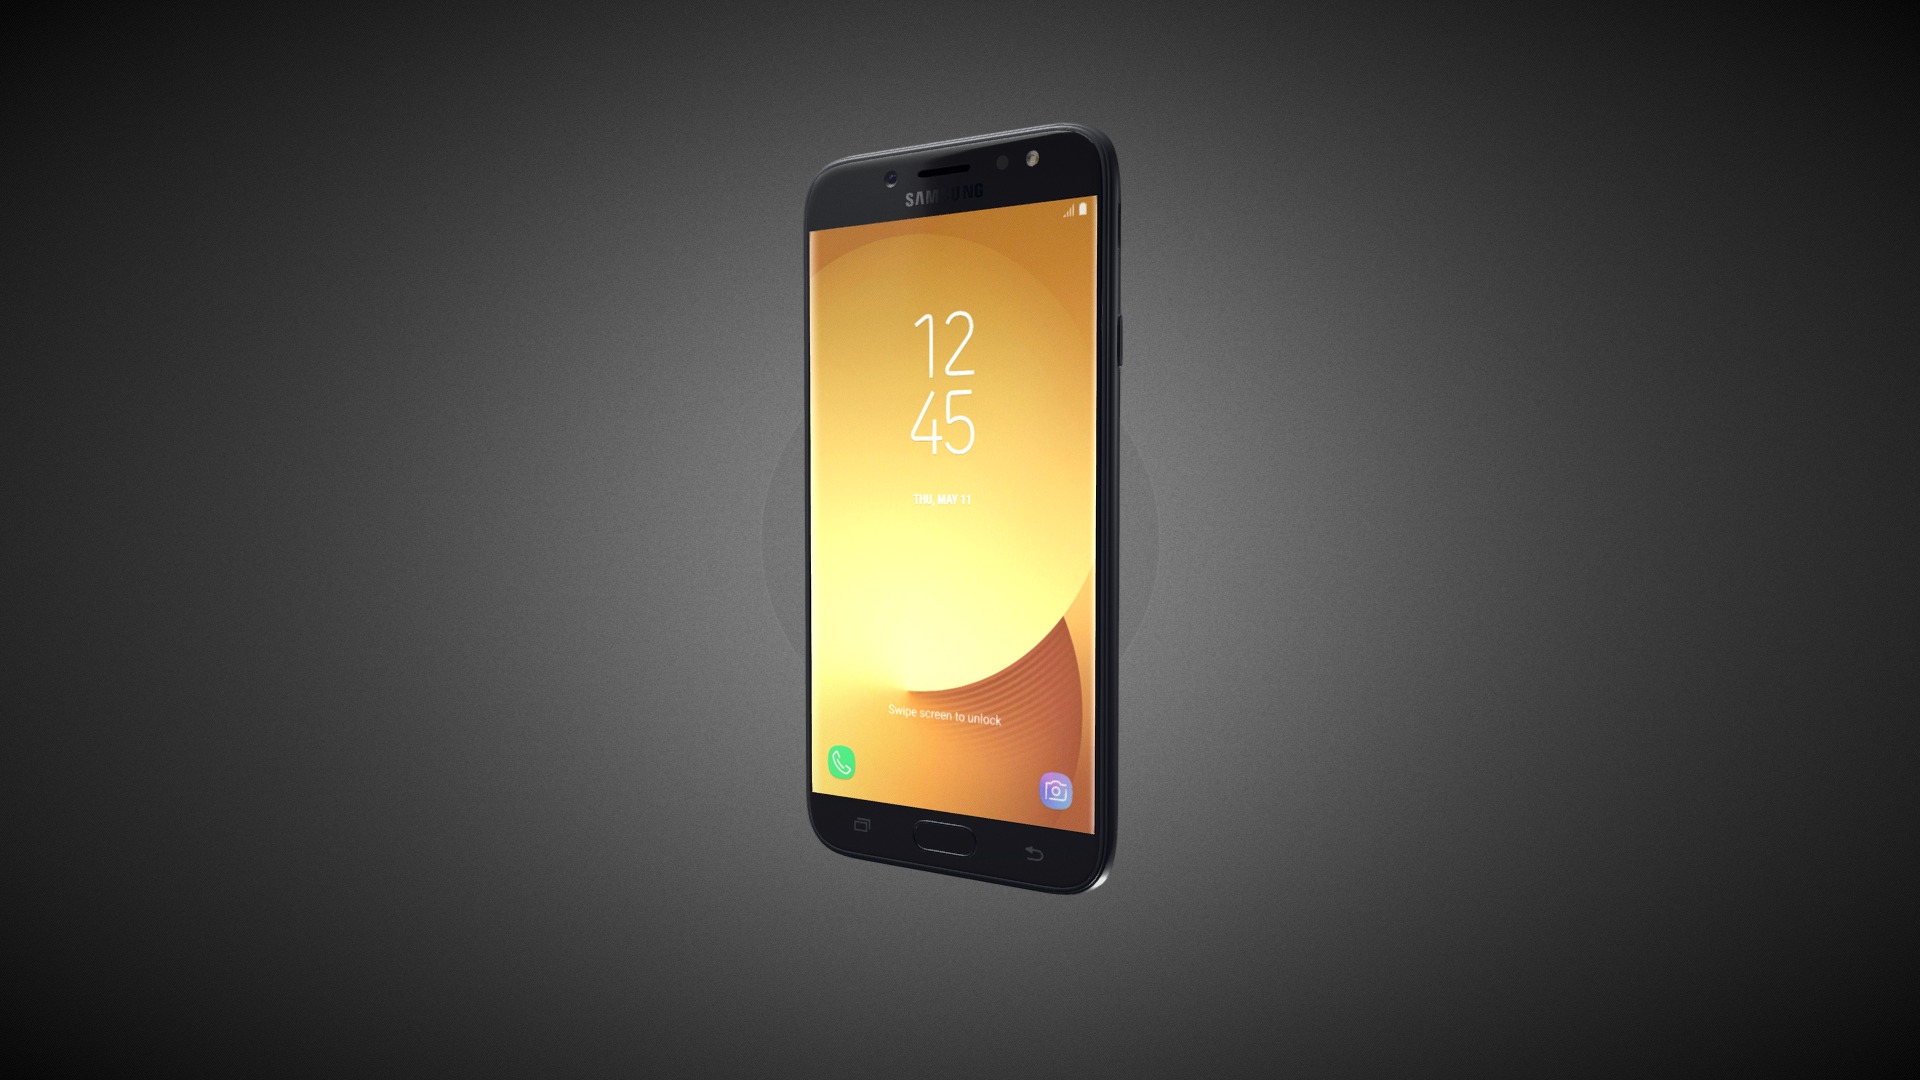 3D model Samsung Galaxy Pro J7 2017 for Element 3D - This is a 3D model of the Samsung Galaxy Pro J7 2017 for Element 3D. The 3D model is about a black smartphone with a yellow screen.